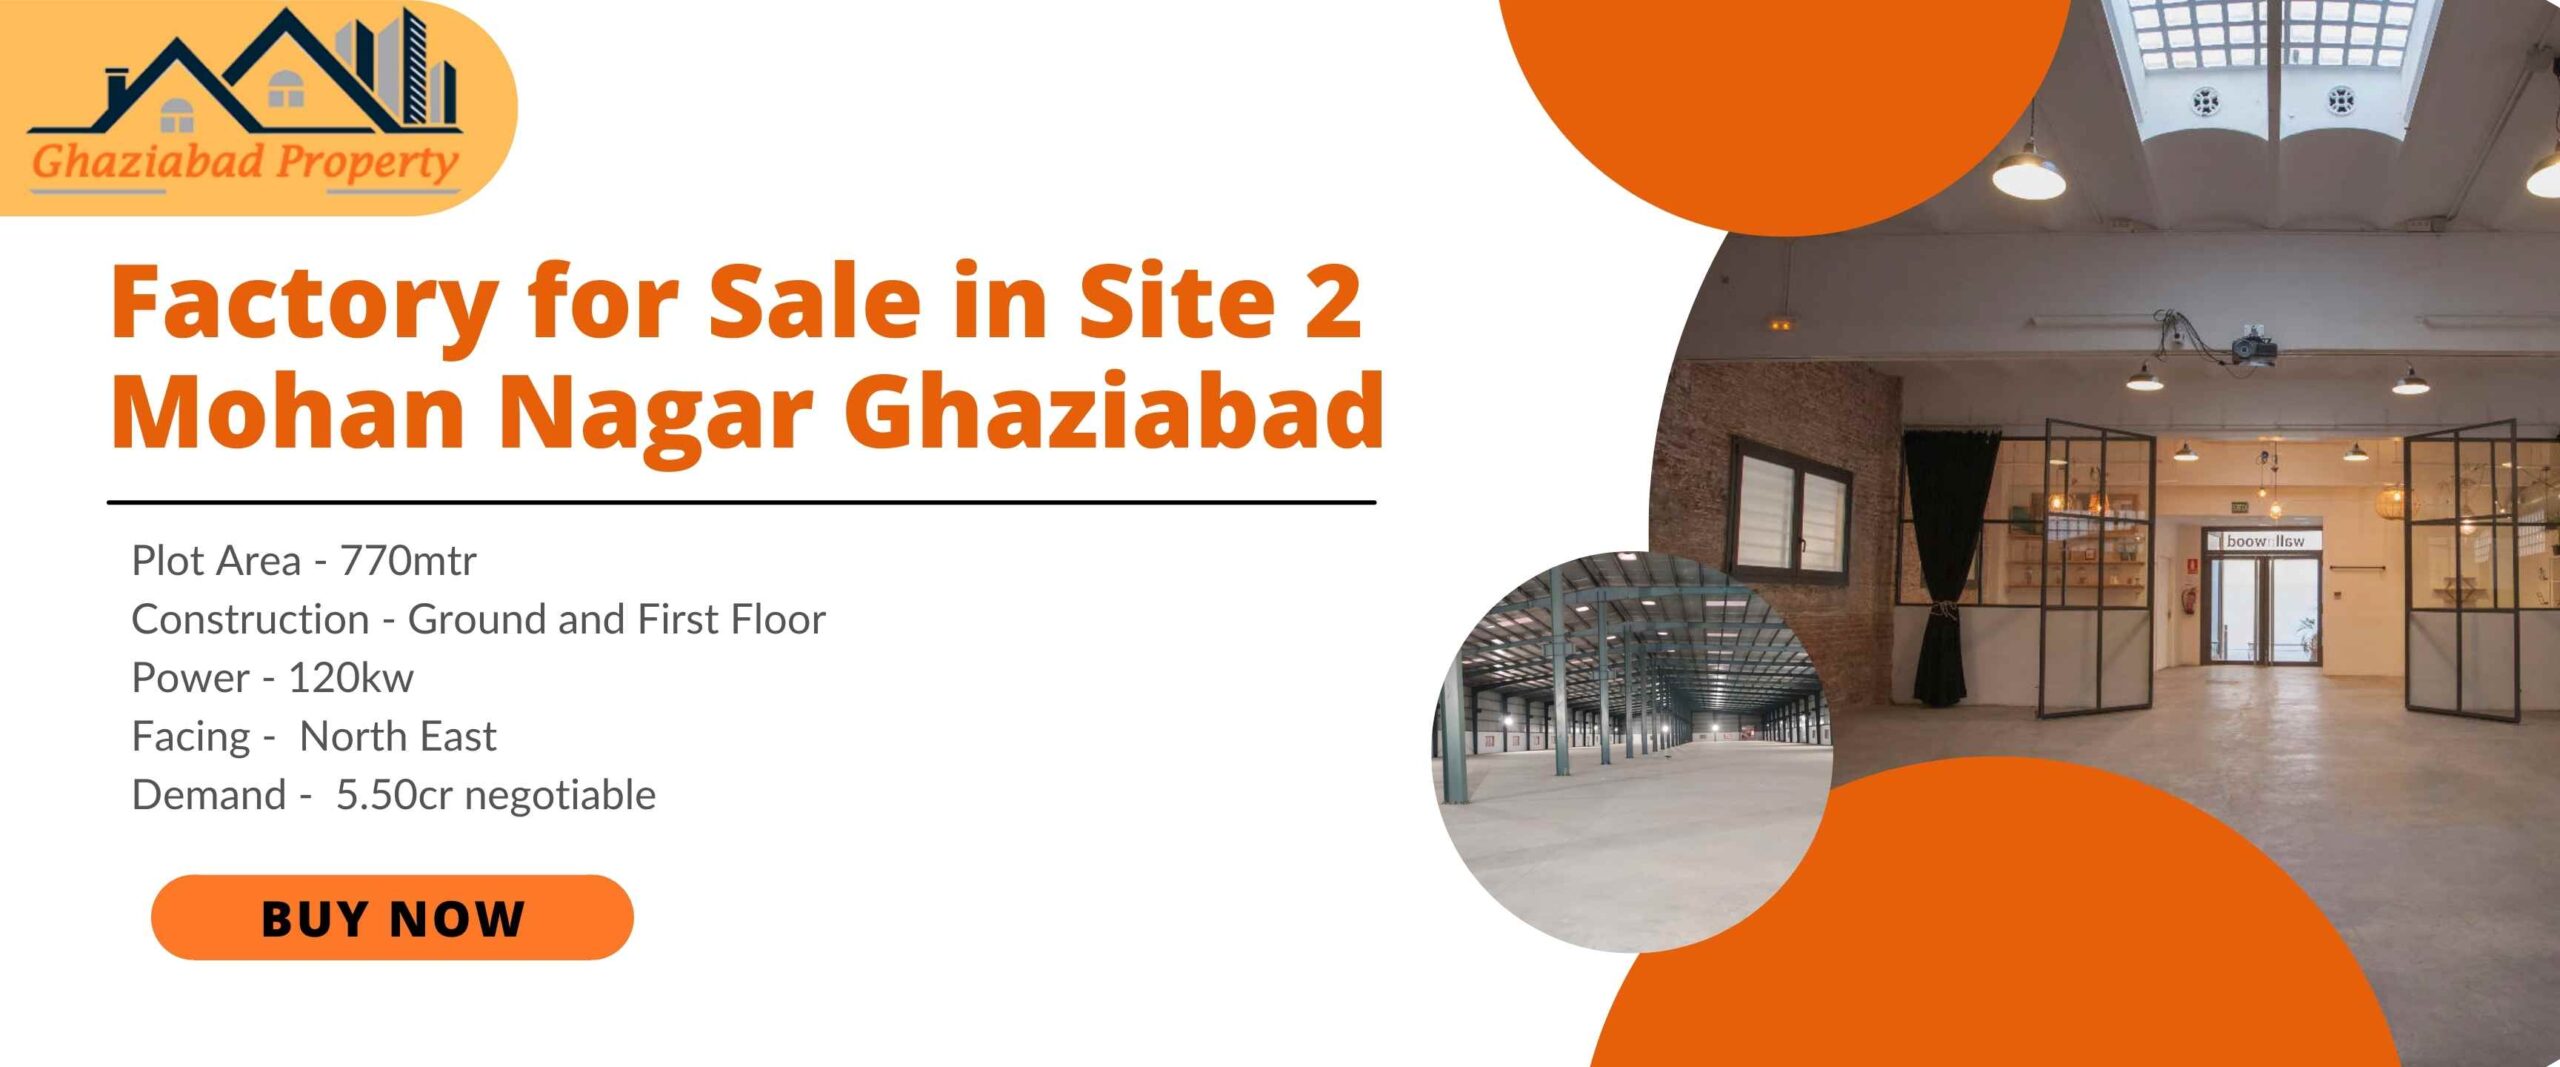 Commercial Property for Sale – Factory for Sale in Site 2 Mohan Nagar Ghaziabad